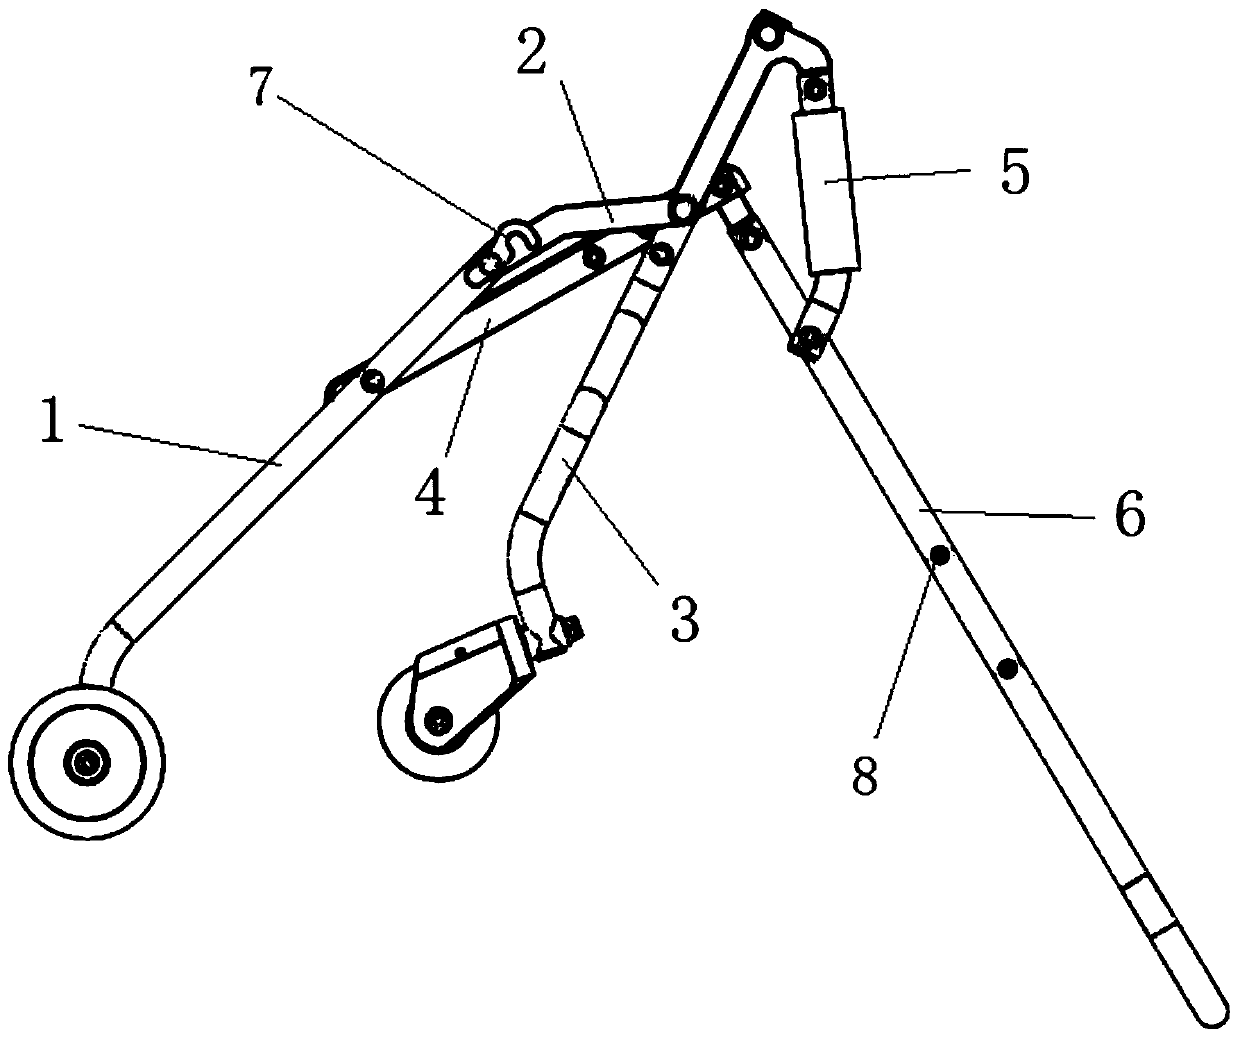 Foldable frame structure applied to portable baby carriage